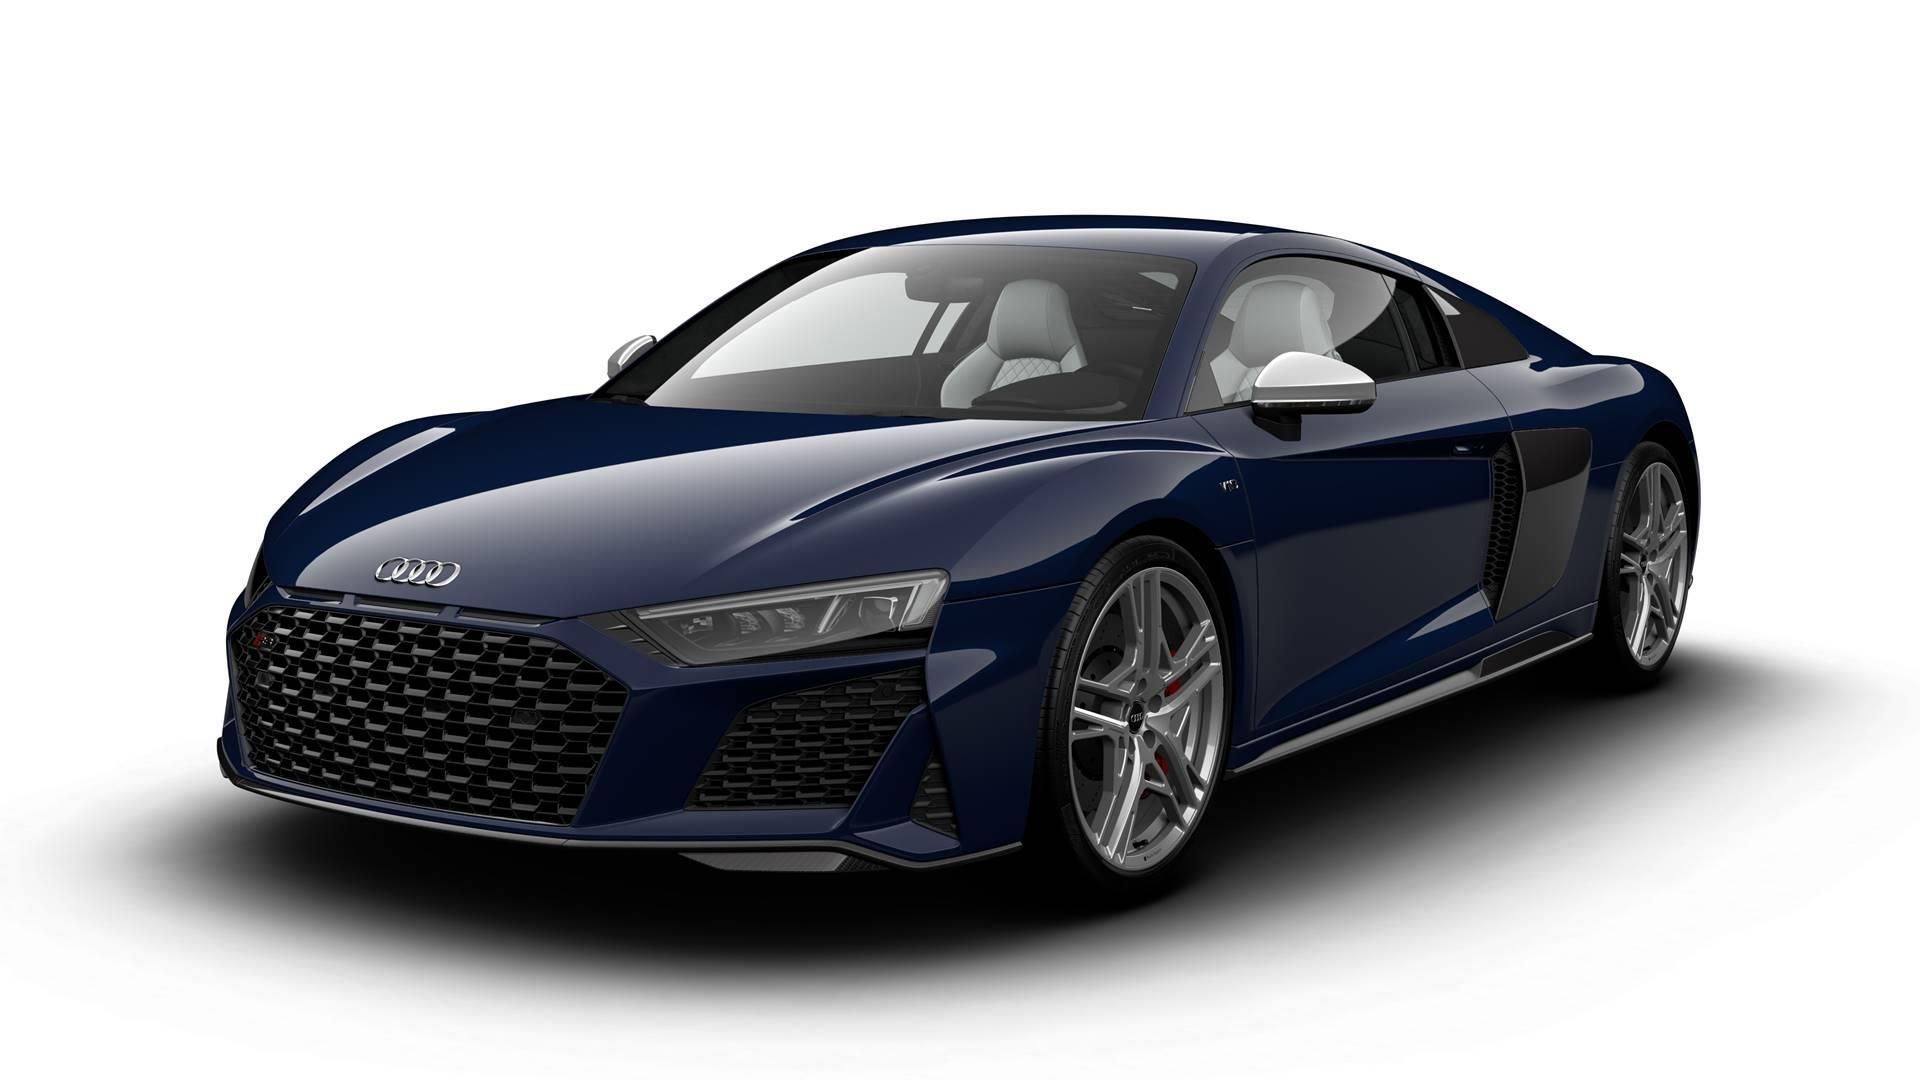 Audi R8 V10 Limited Edition Wallpaper and Image Gallery